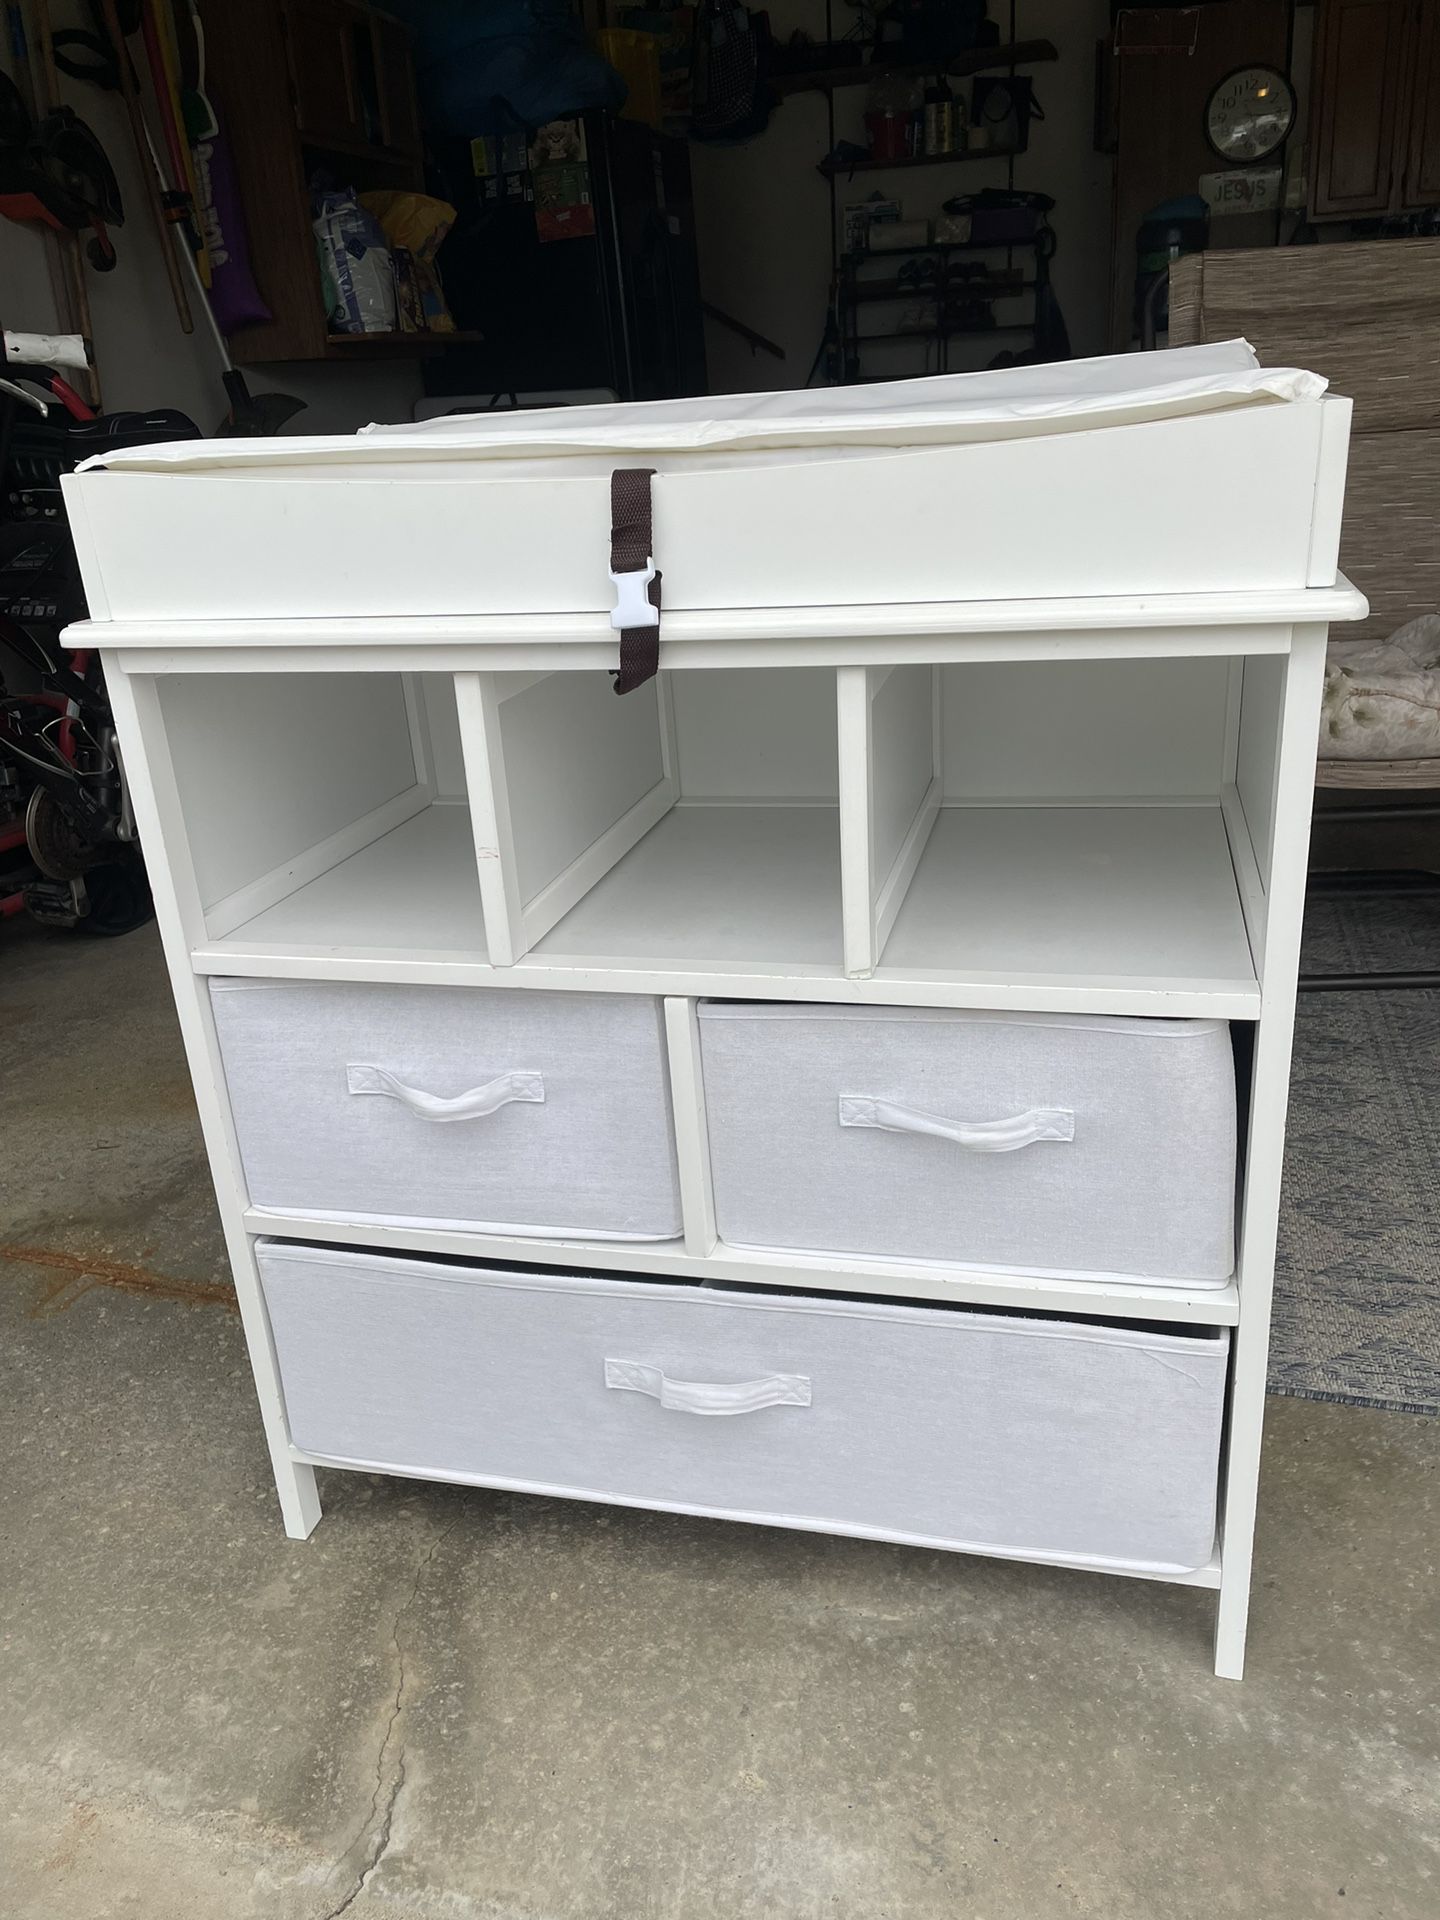 Baby Changing Table/ Dresser